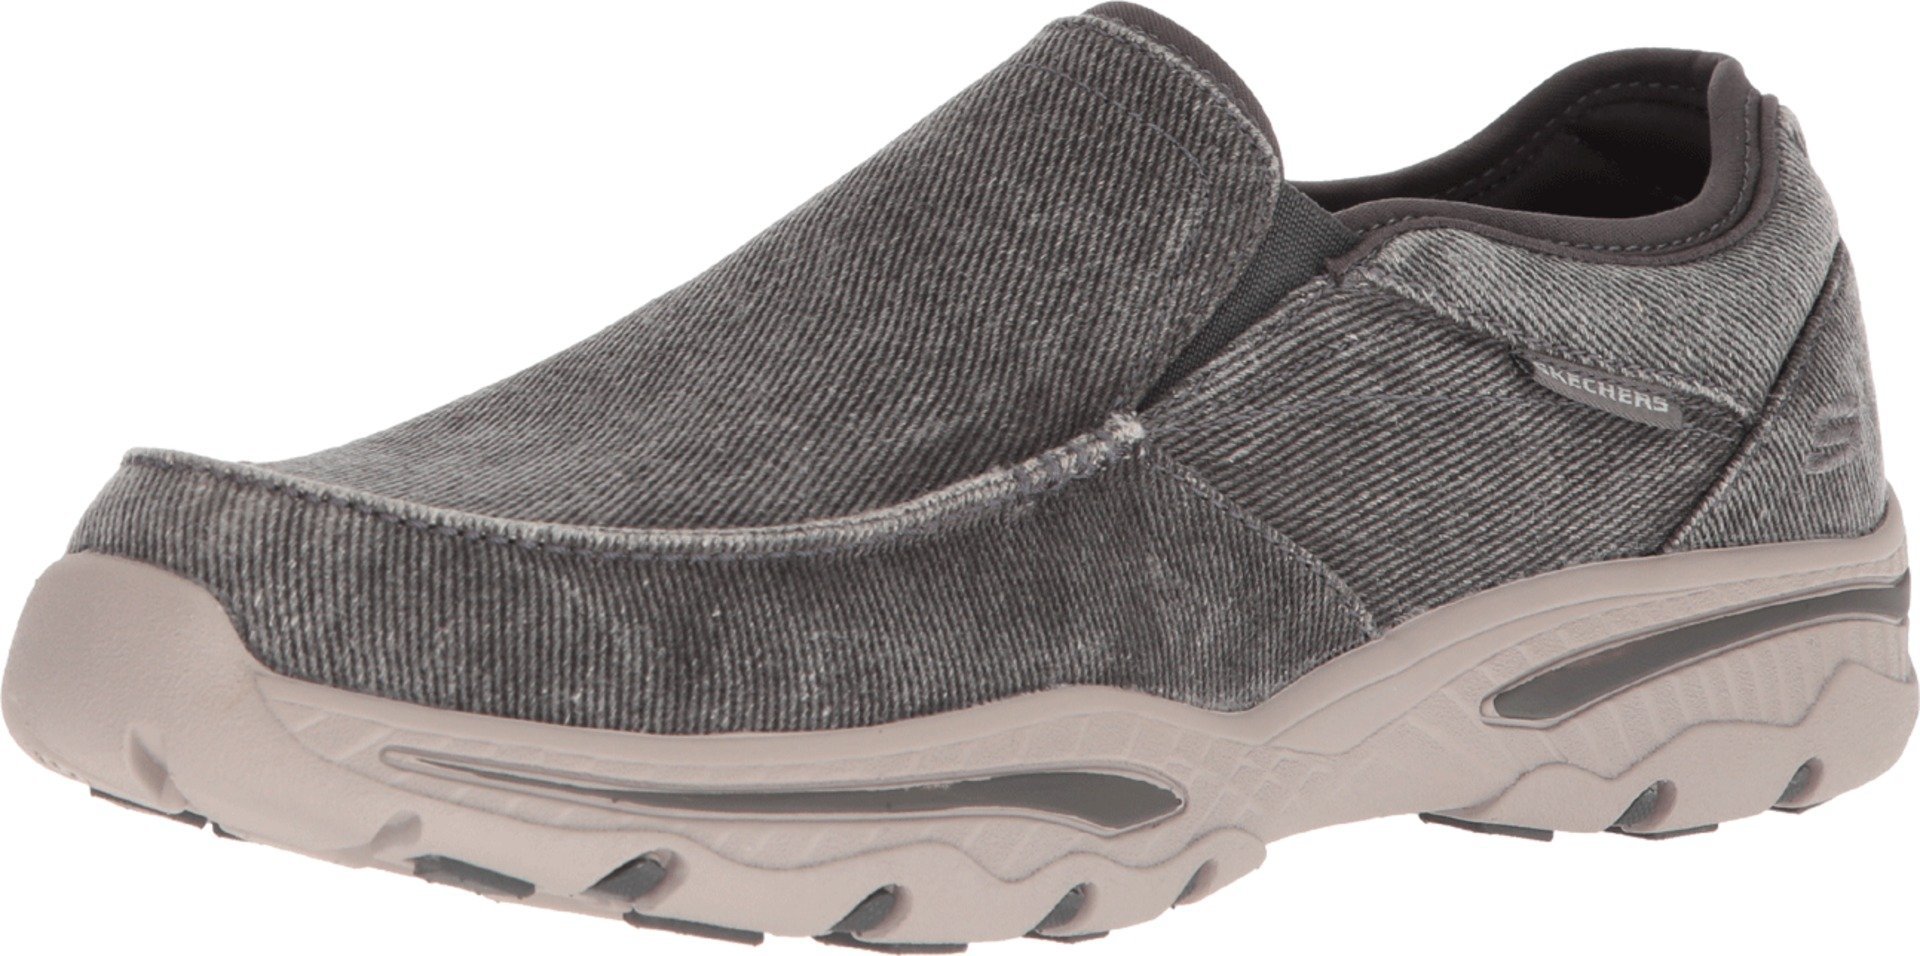 $30.07: Skechers Men's Relaxed Fit Creston-Moseco Canvas Loafer Shoe (Charcoal)